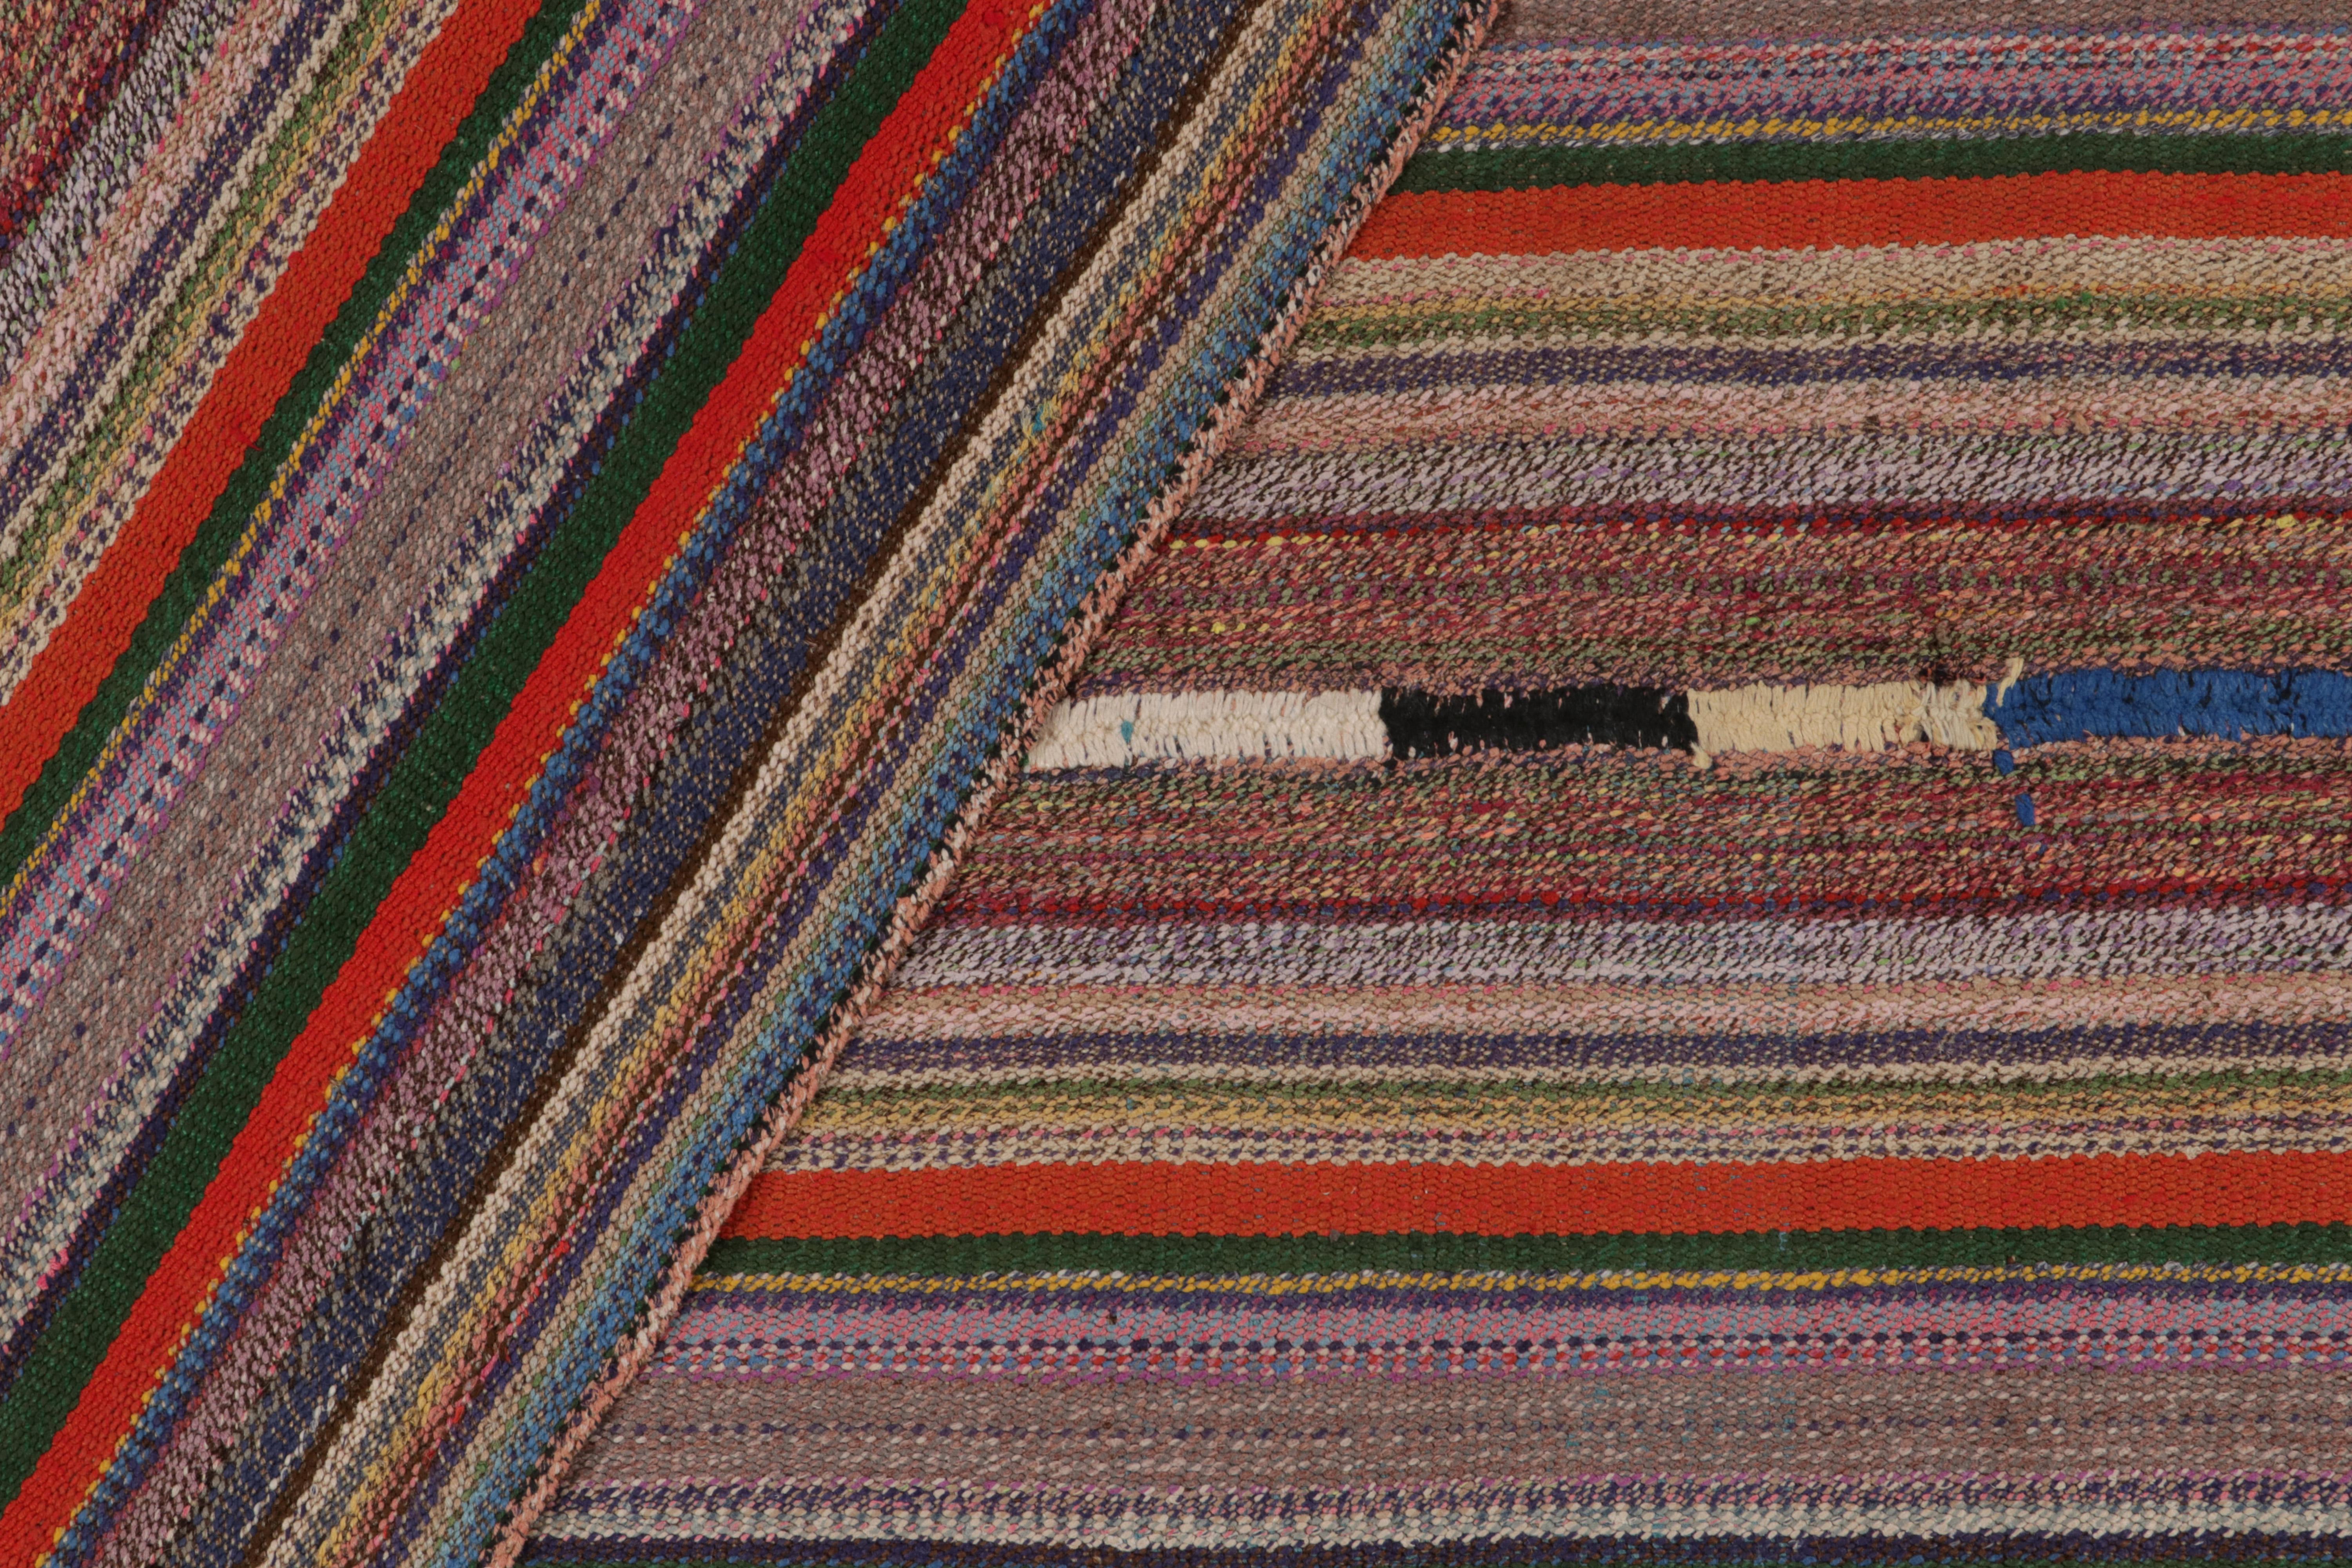 Hand-Knotted 1950s Vintage Chaput Kilim Rug in Polychromatic Stripe Patterns by Rug & Kilim For Sale